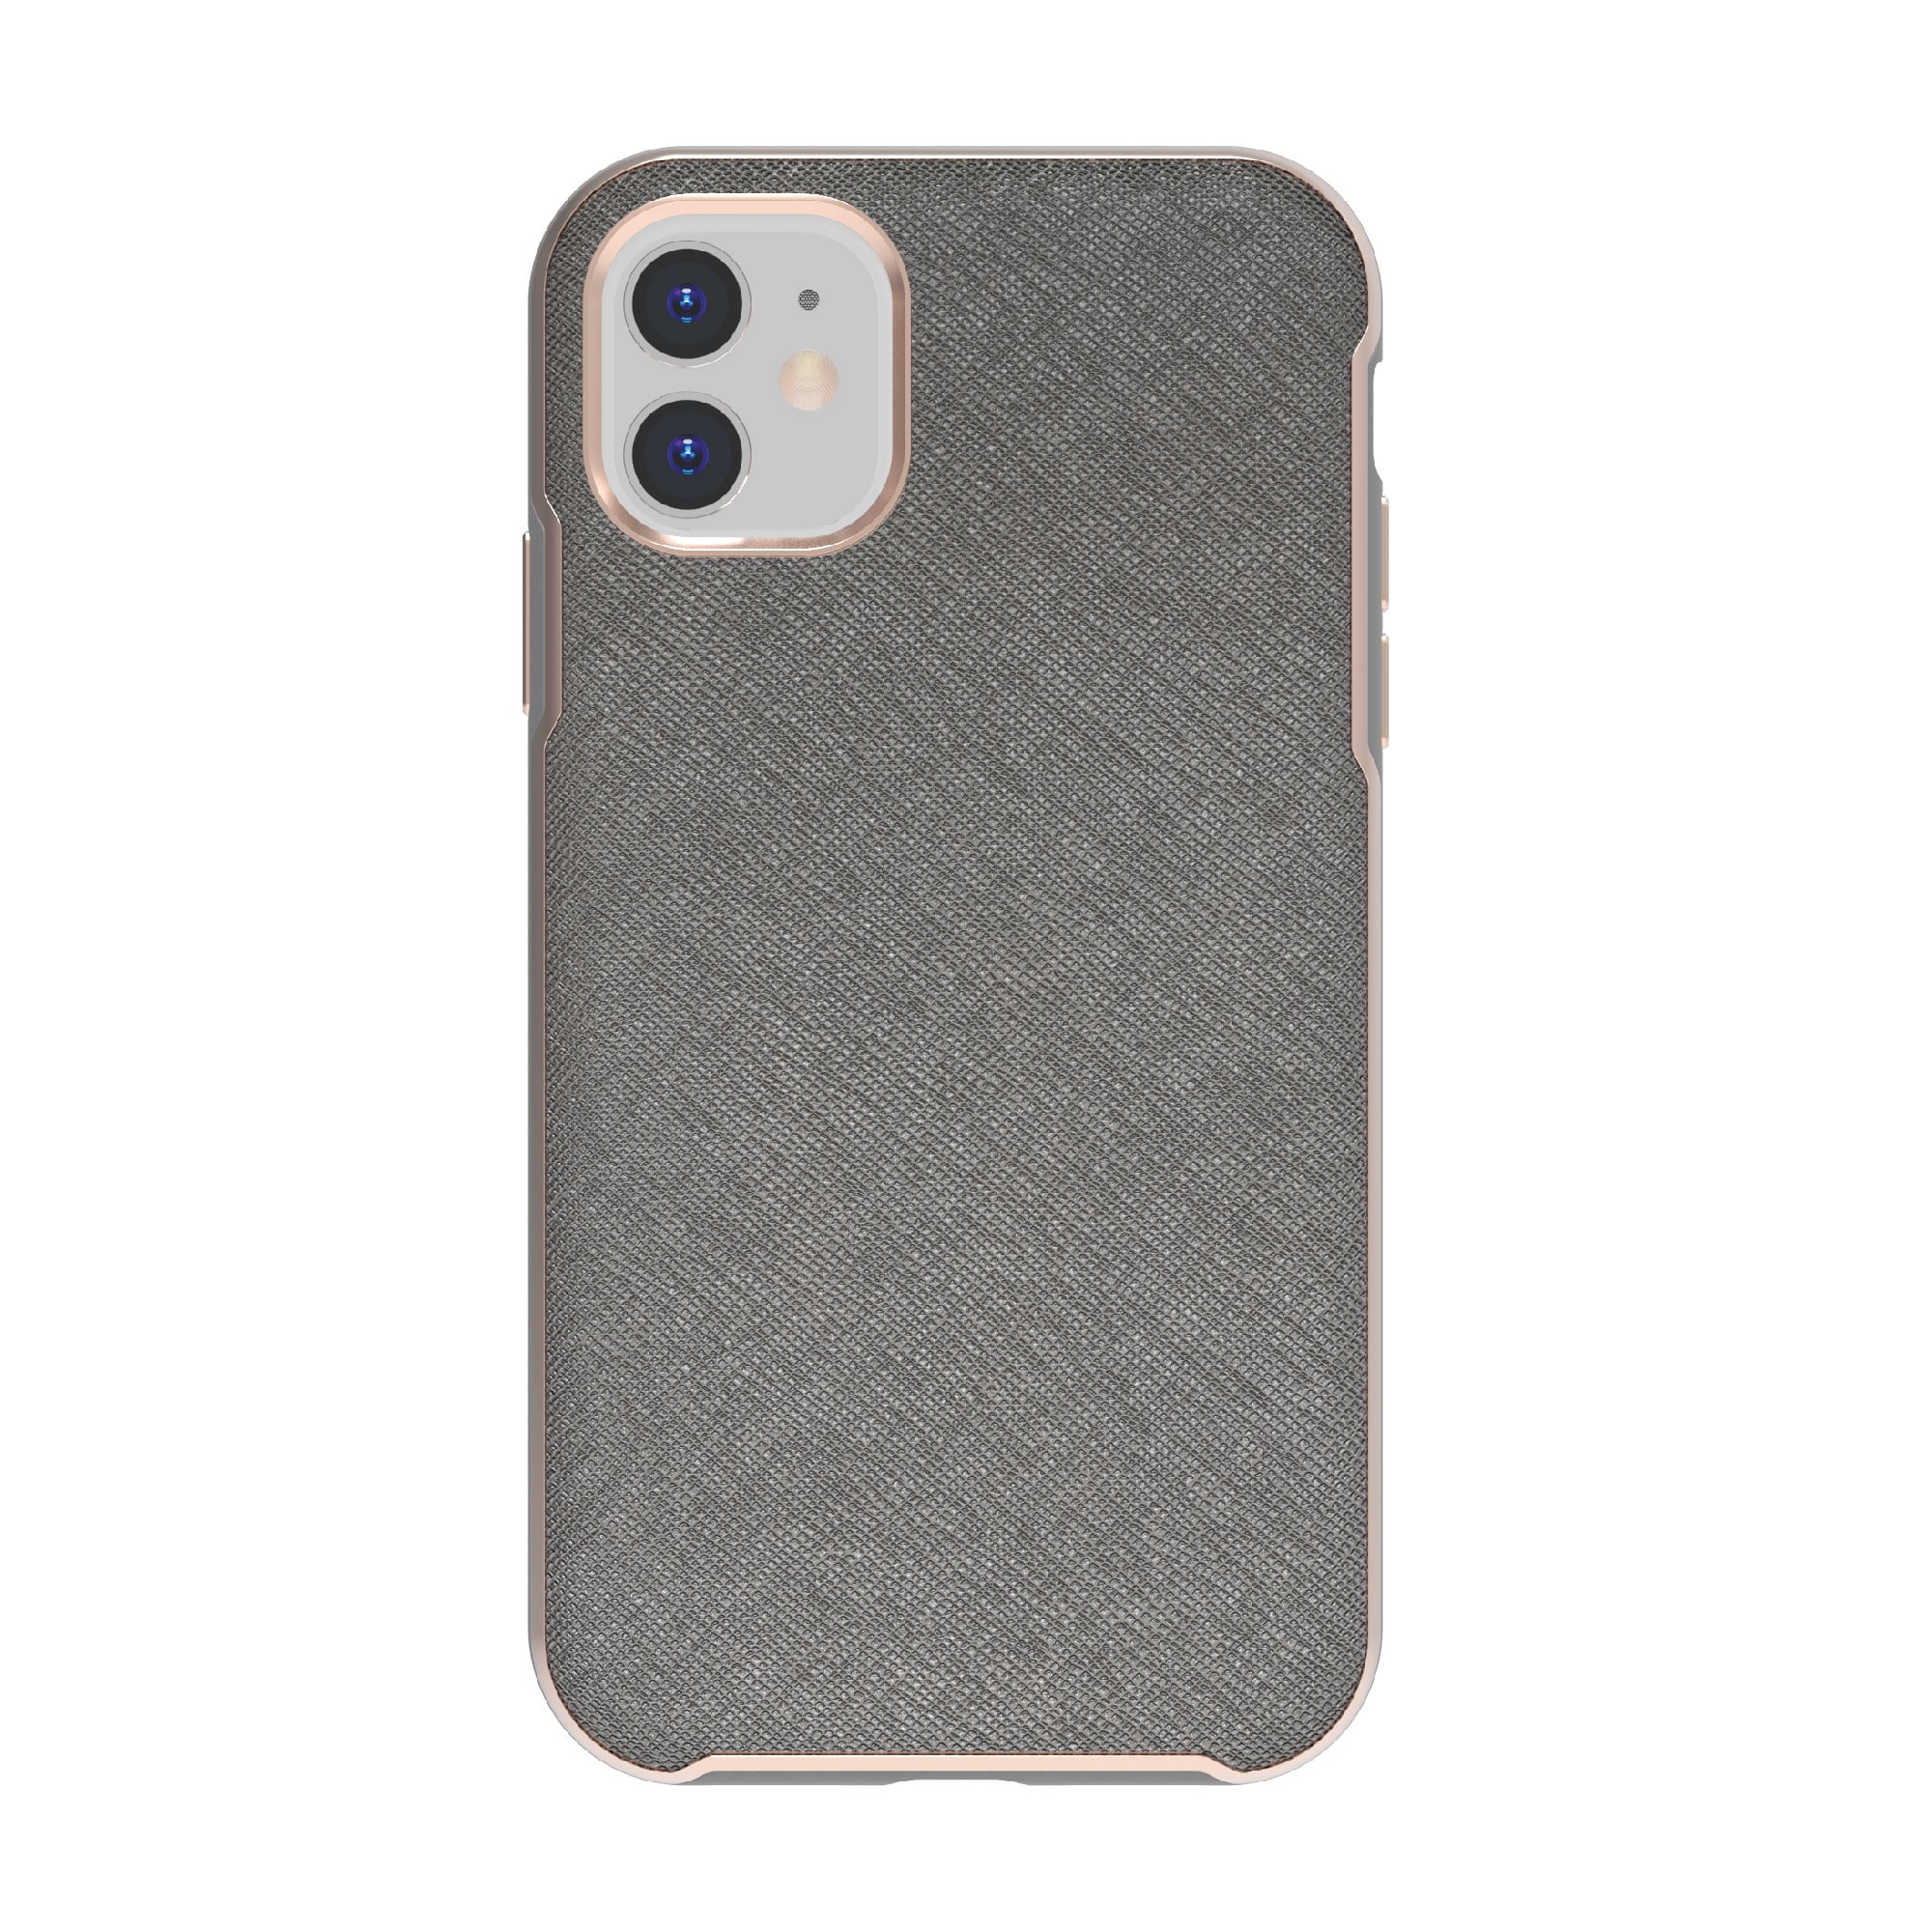 onn. Vegan Leather with Rose Gold Metallic Trim Phone Case for iPhone 11/XR, Gray